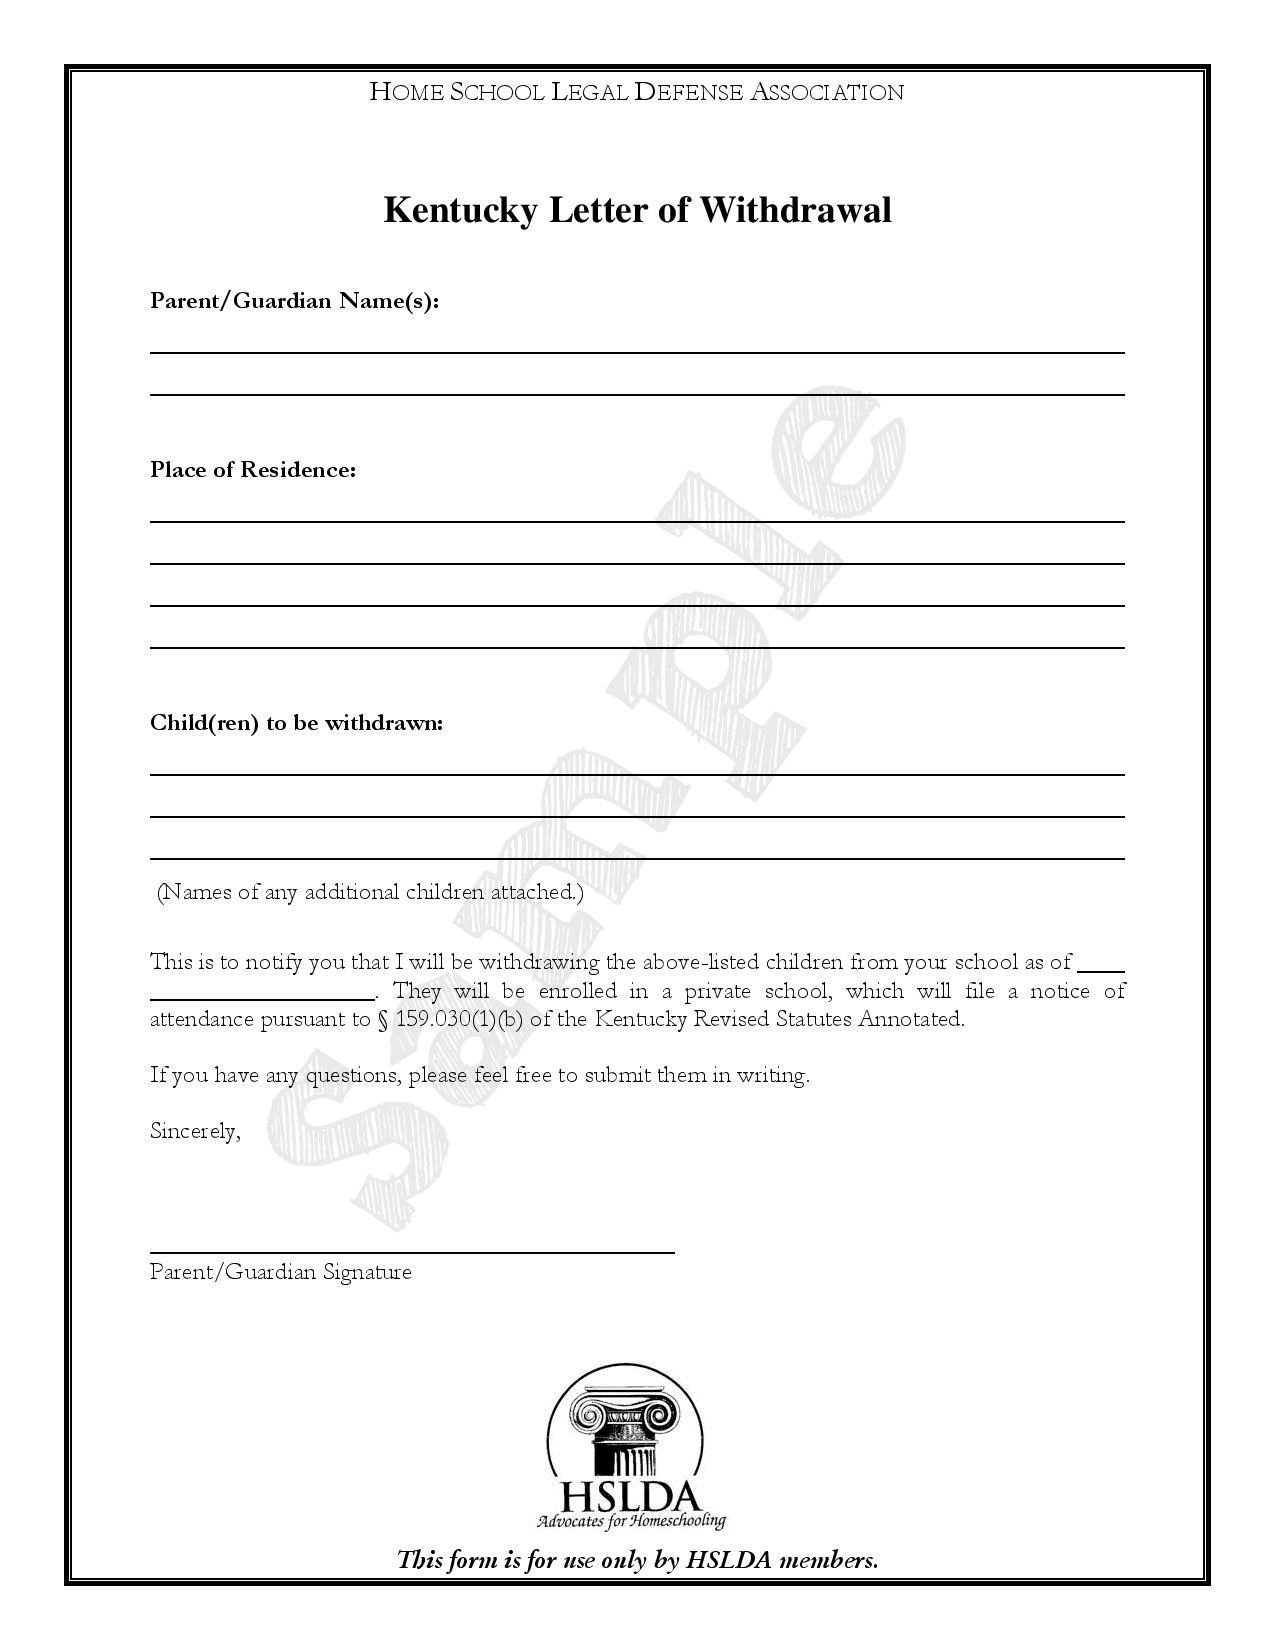 Sample Letter Of Intent To Homeschool Nj | Review Home Co